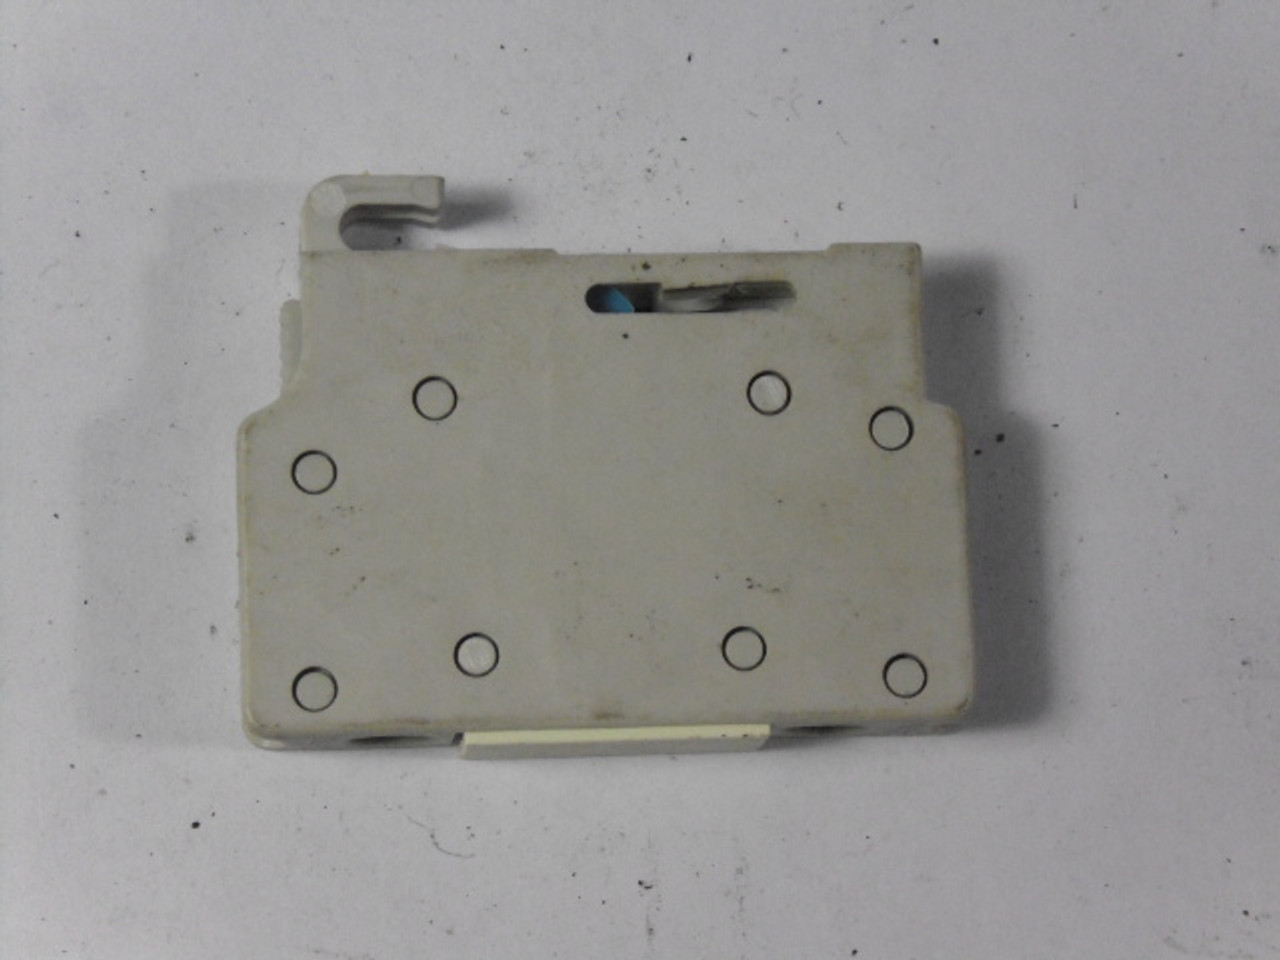 Siemens 3TX4010-2A Aux Contact Block USED